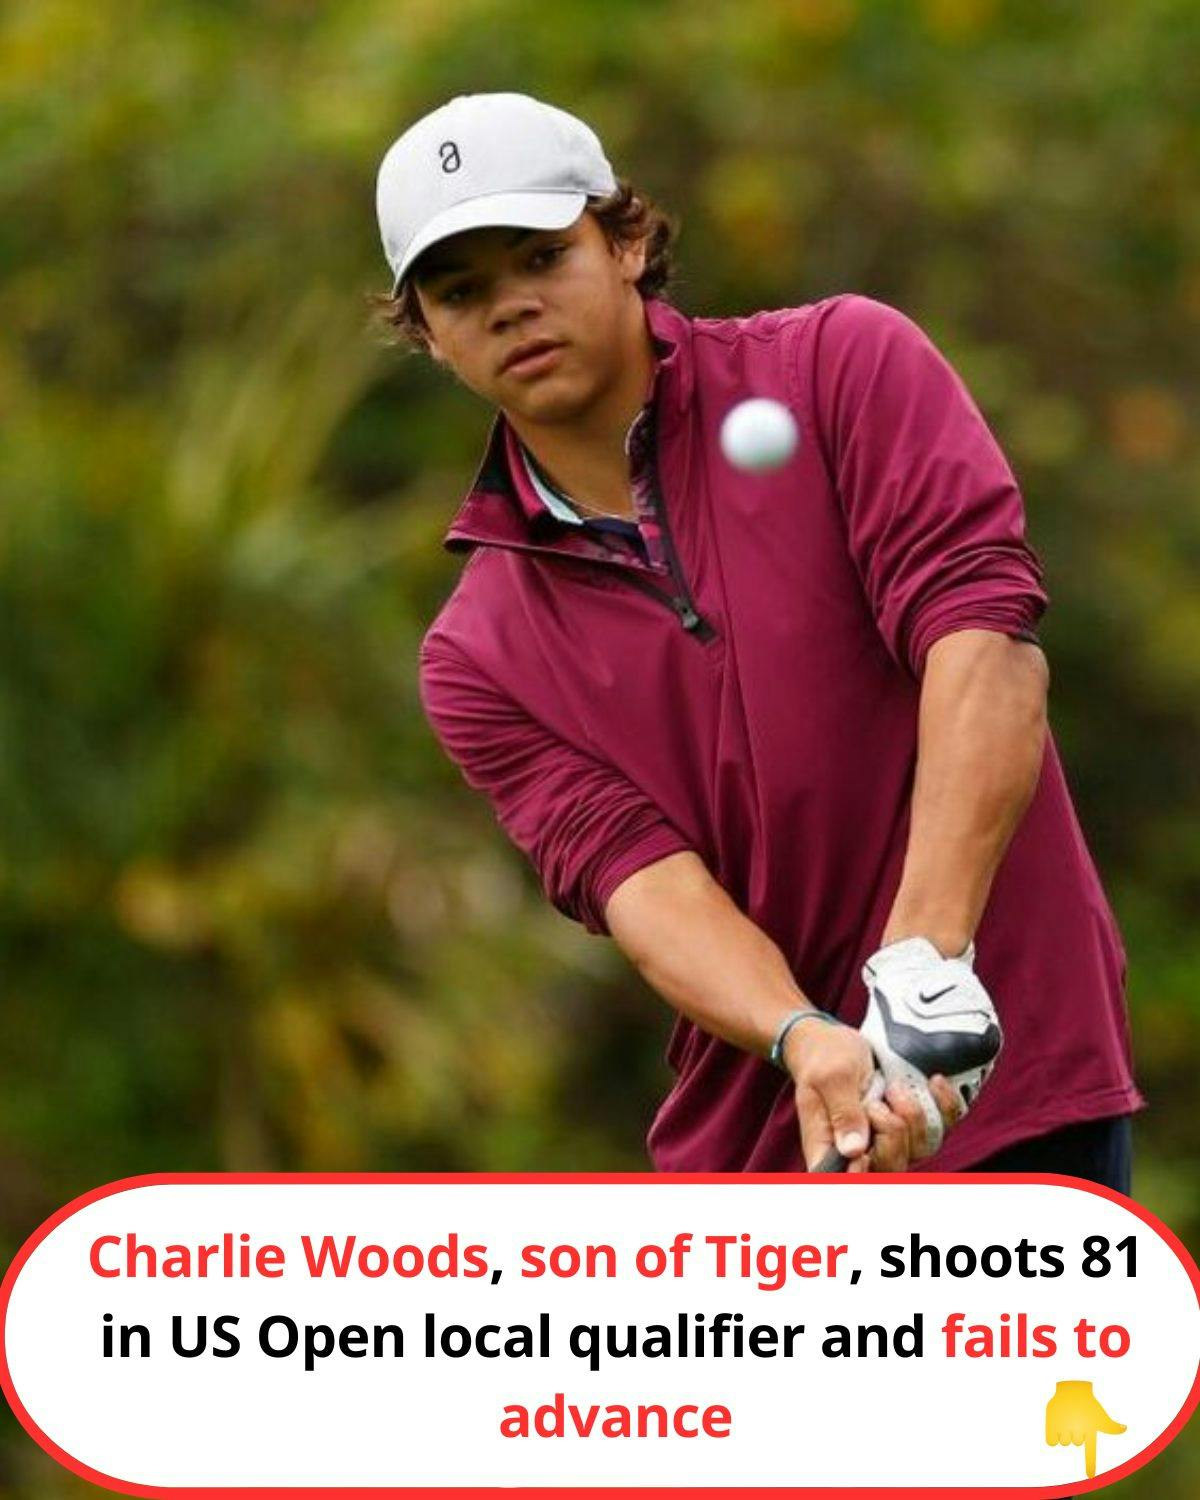 Cover Image for Charlie Woods, son of Tiger, shoots 81 in US Open local qualifier and fails to advance